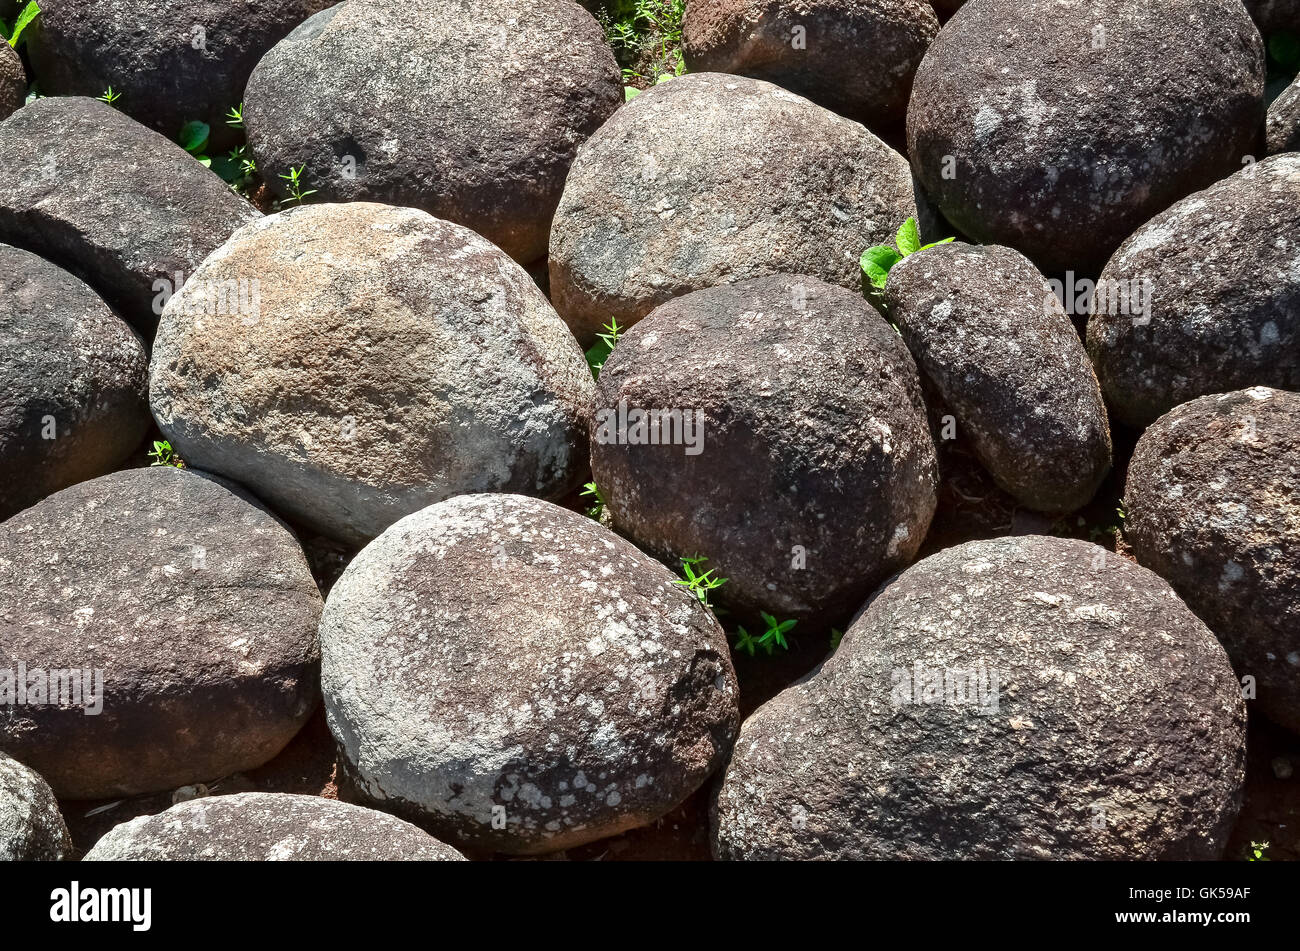 abstract background with dry round feeble stones Stock Photo